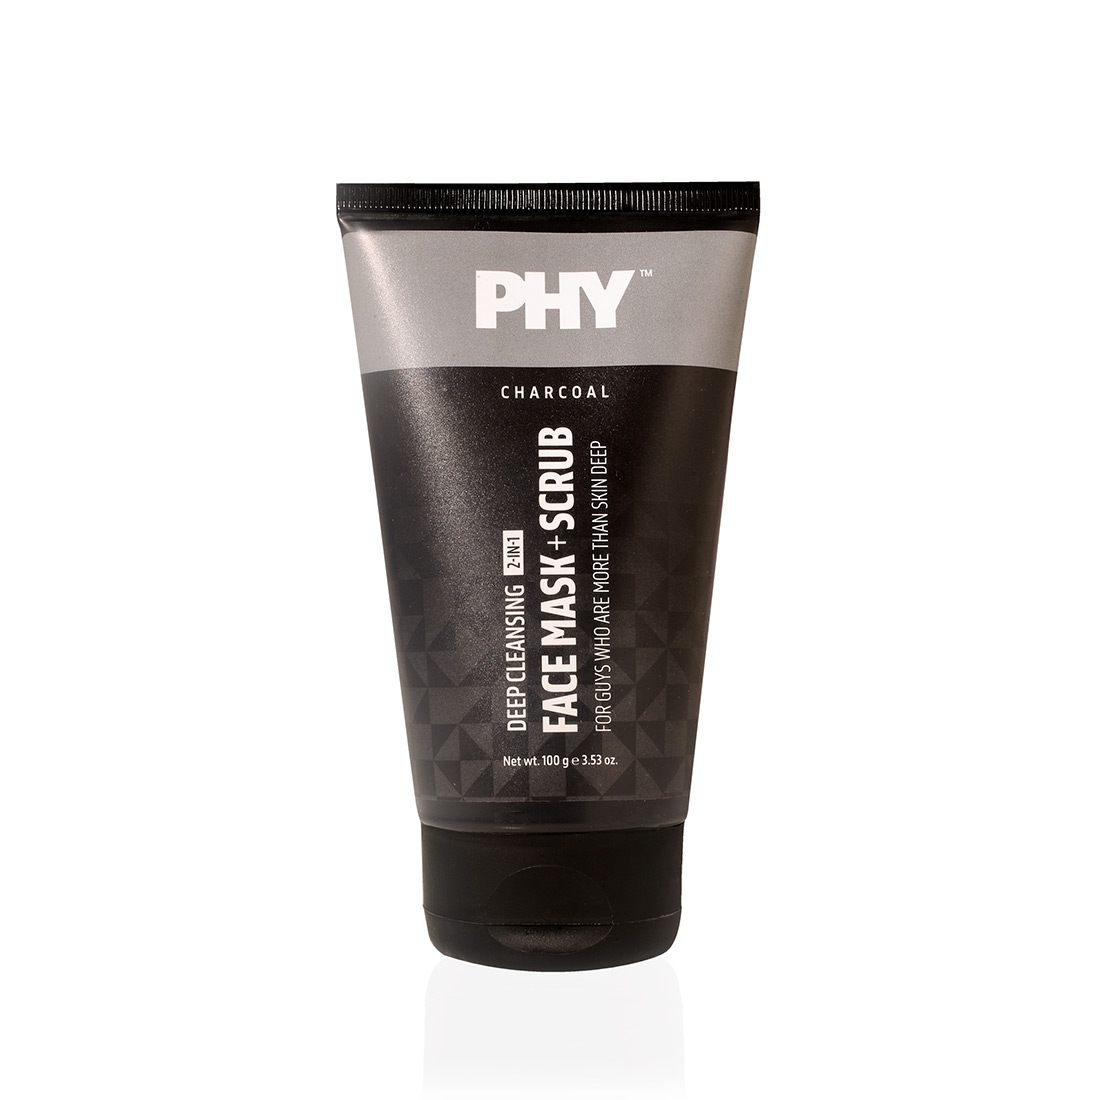 Phy | Phy 2-in-1 Charcoal Face Mask + Scrub